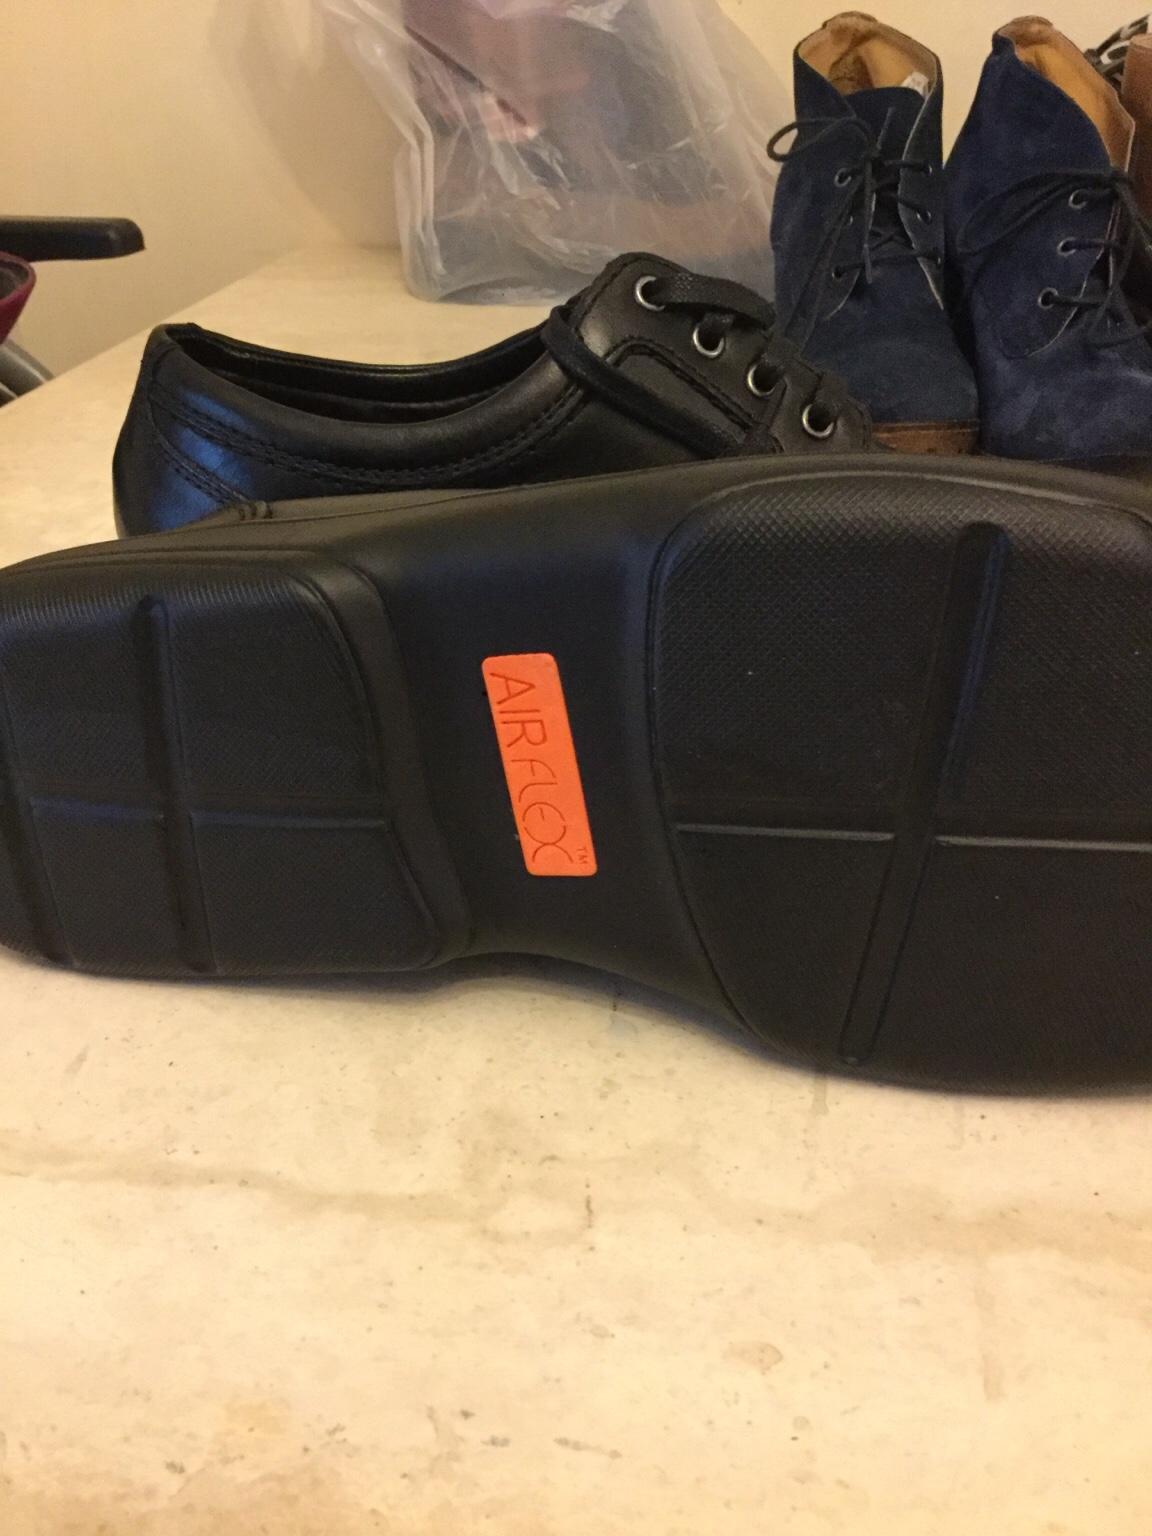 M & s leather extra wide airflex shoes 9 new in ME15 Maidstone for £6. ...